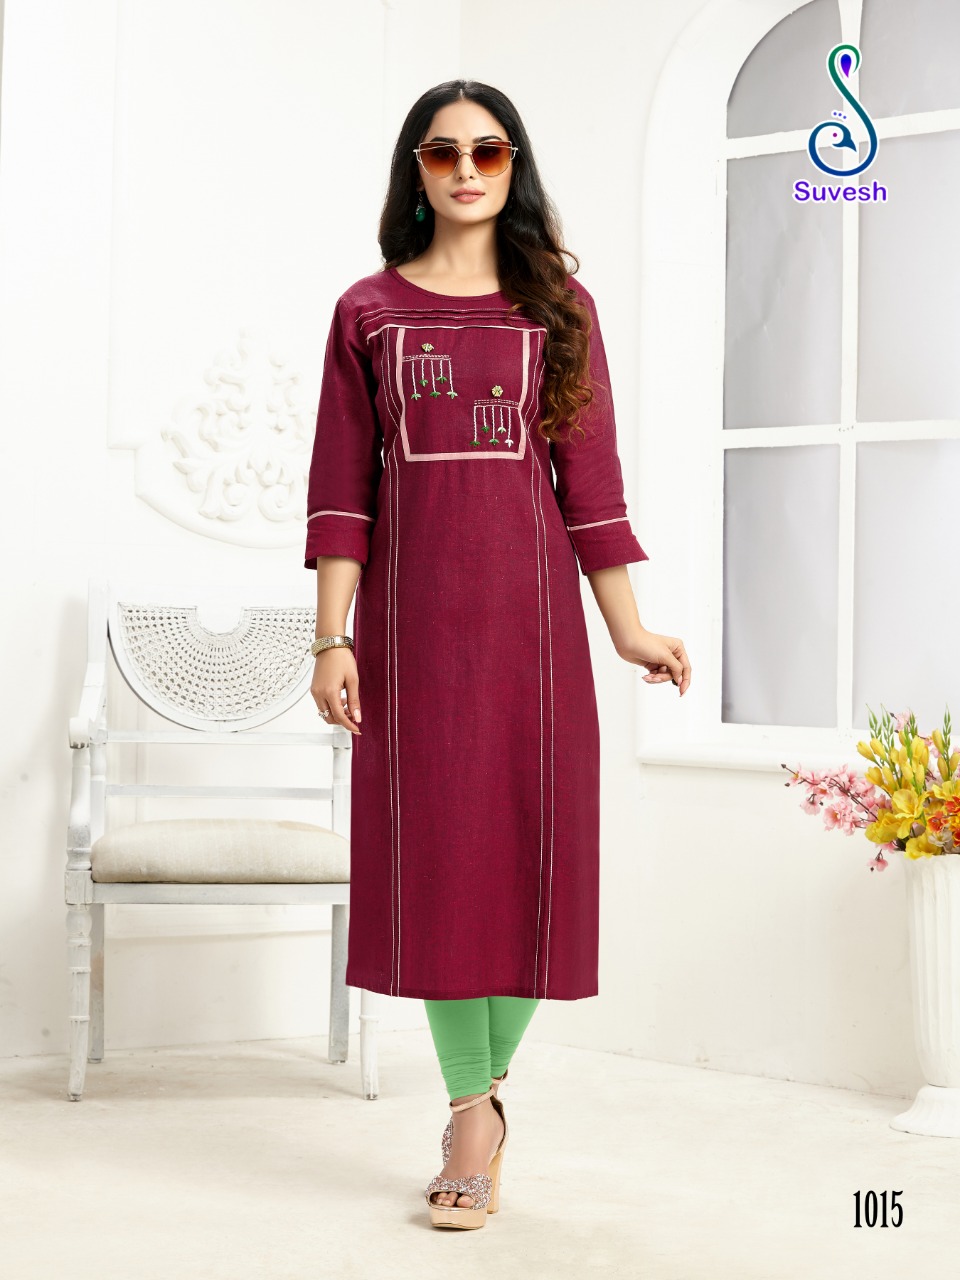 Suvesh Rose Vol 2 Catalogue Fancy Cotton Embroidery Work Kurtis Collection Wholesale Rates Supplier From Surat